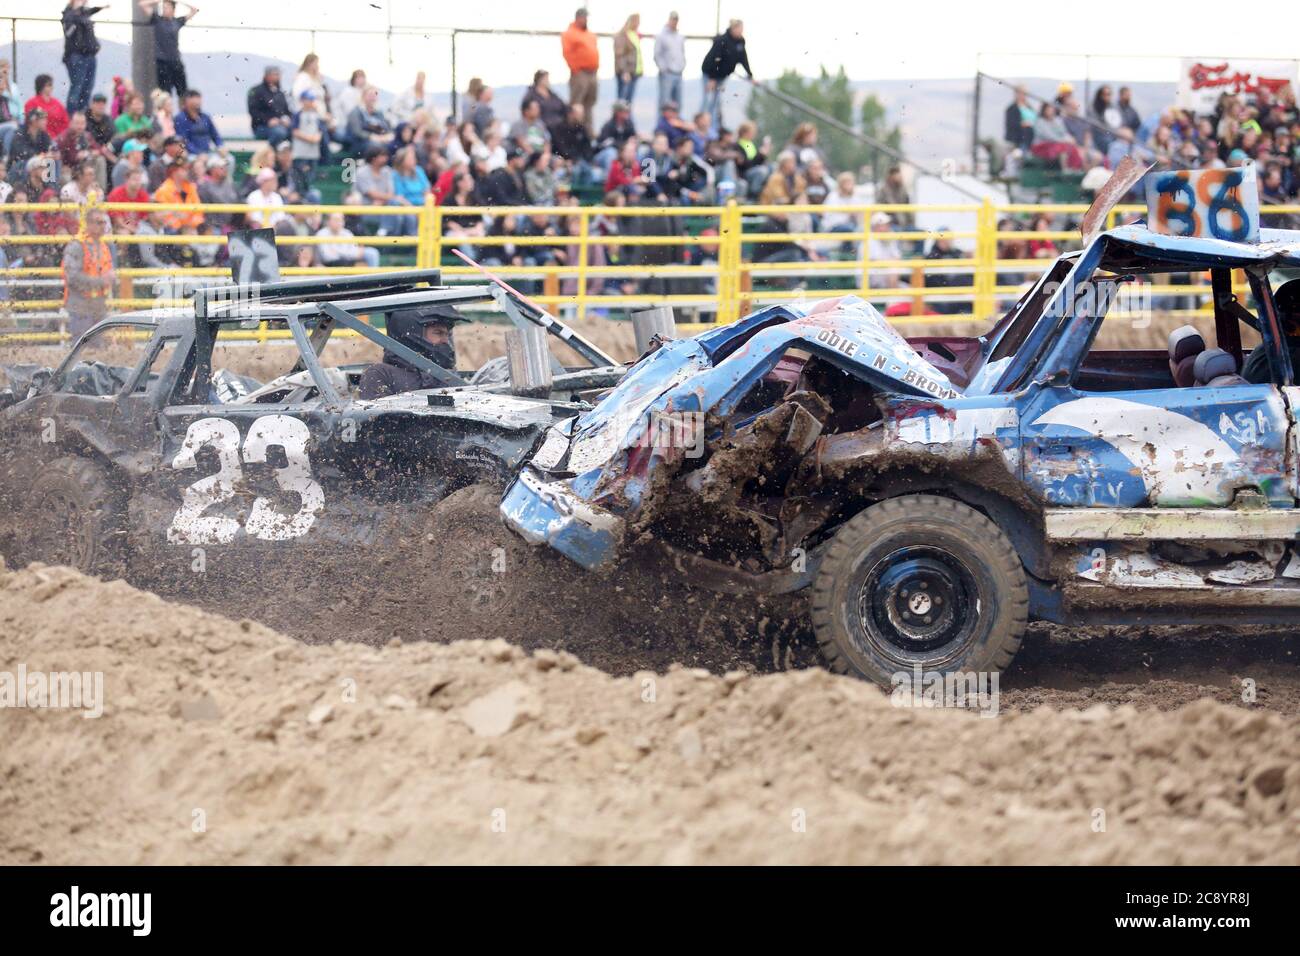 Idaho Falls, Idaho, USA August 17, 2016 Dust flies as cars and drivers in a small arena compete in a small town demolition derby. Stock Photo